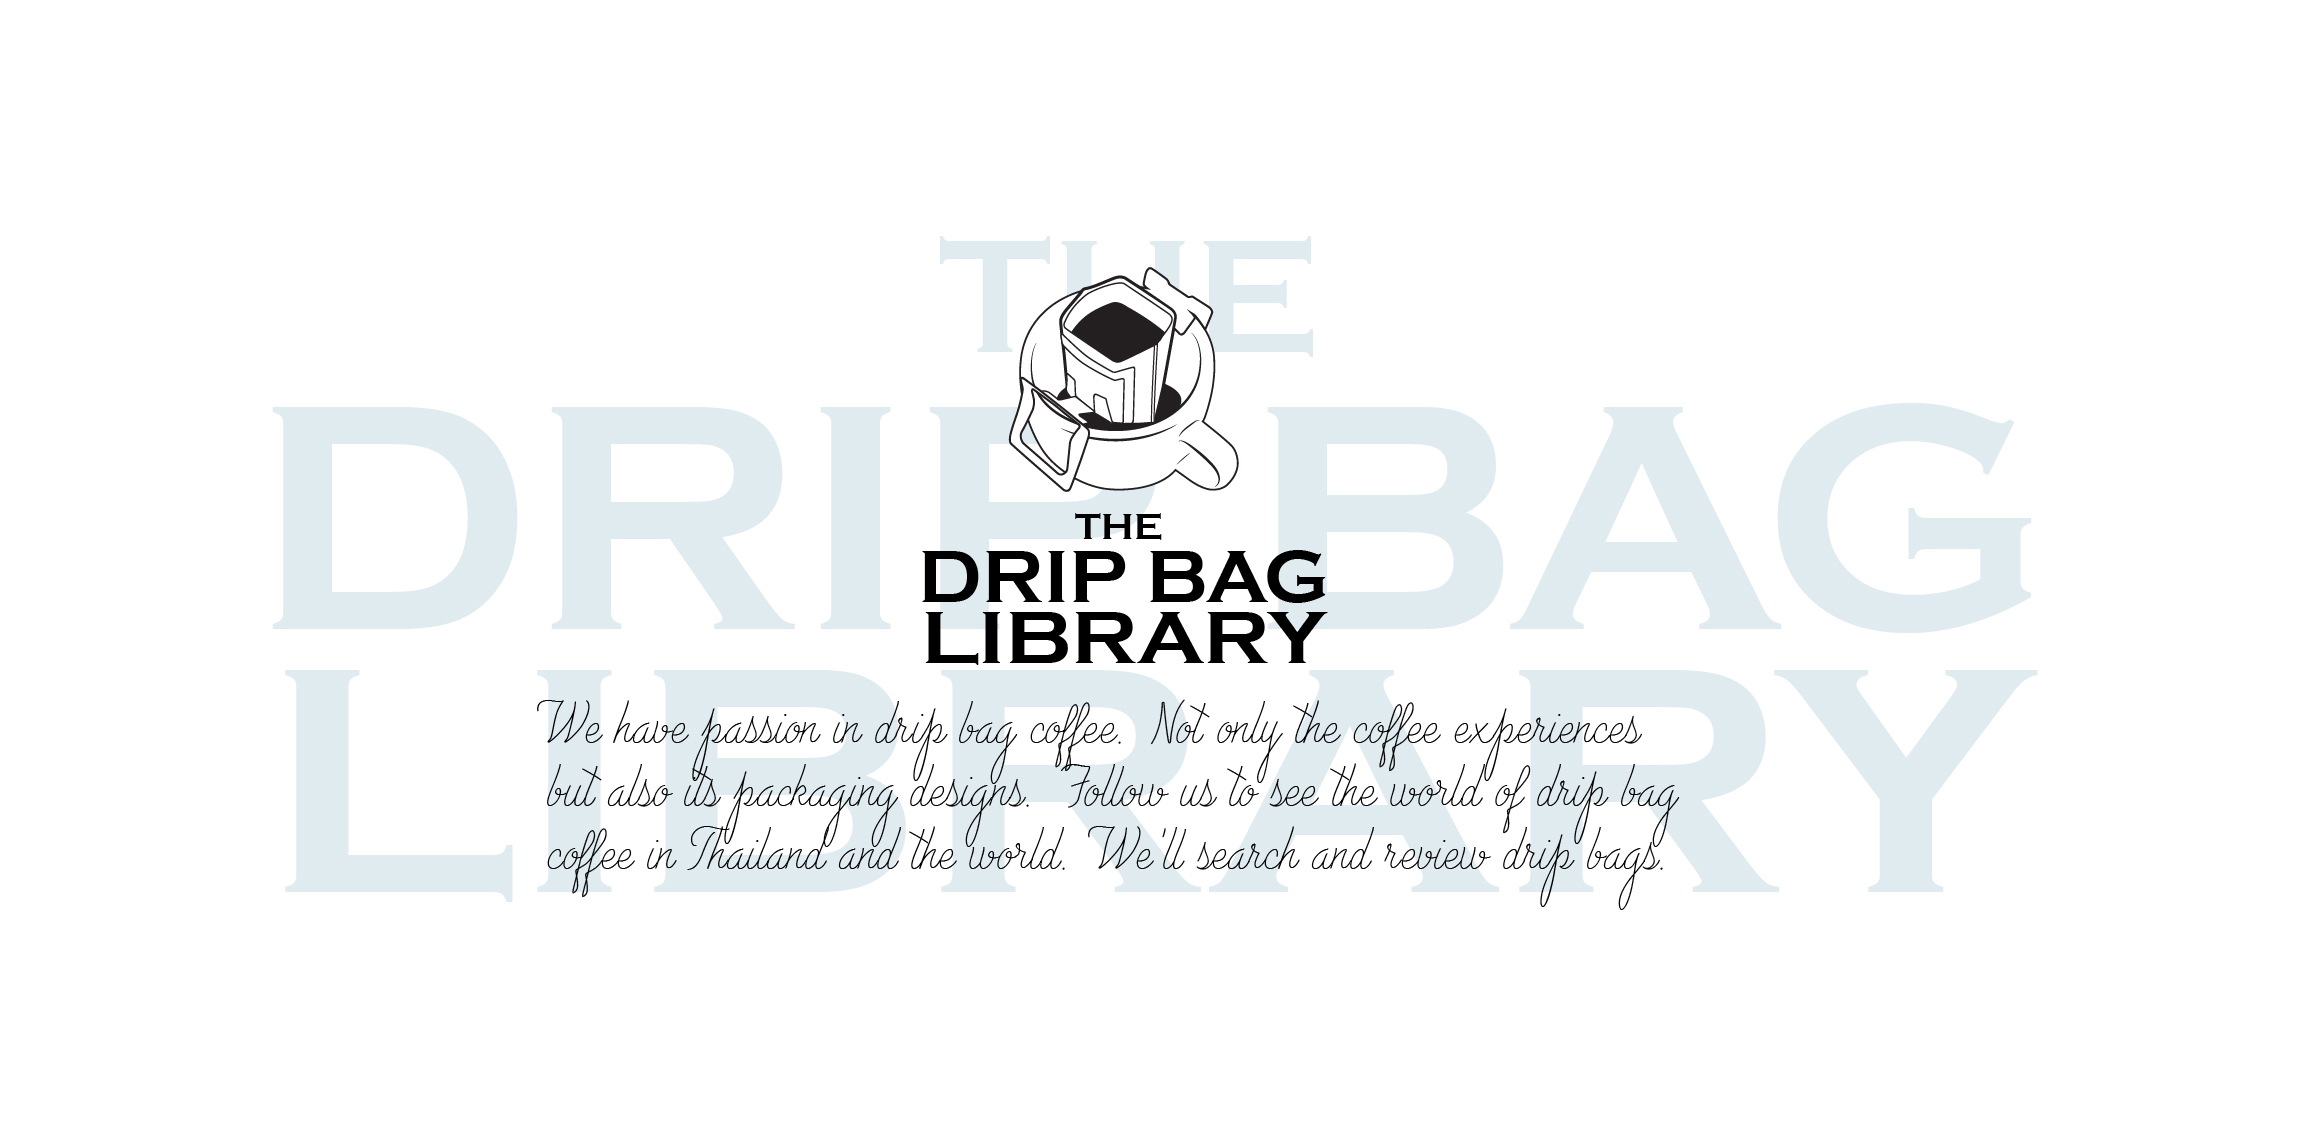 About The drip library coffee